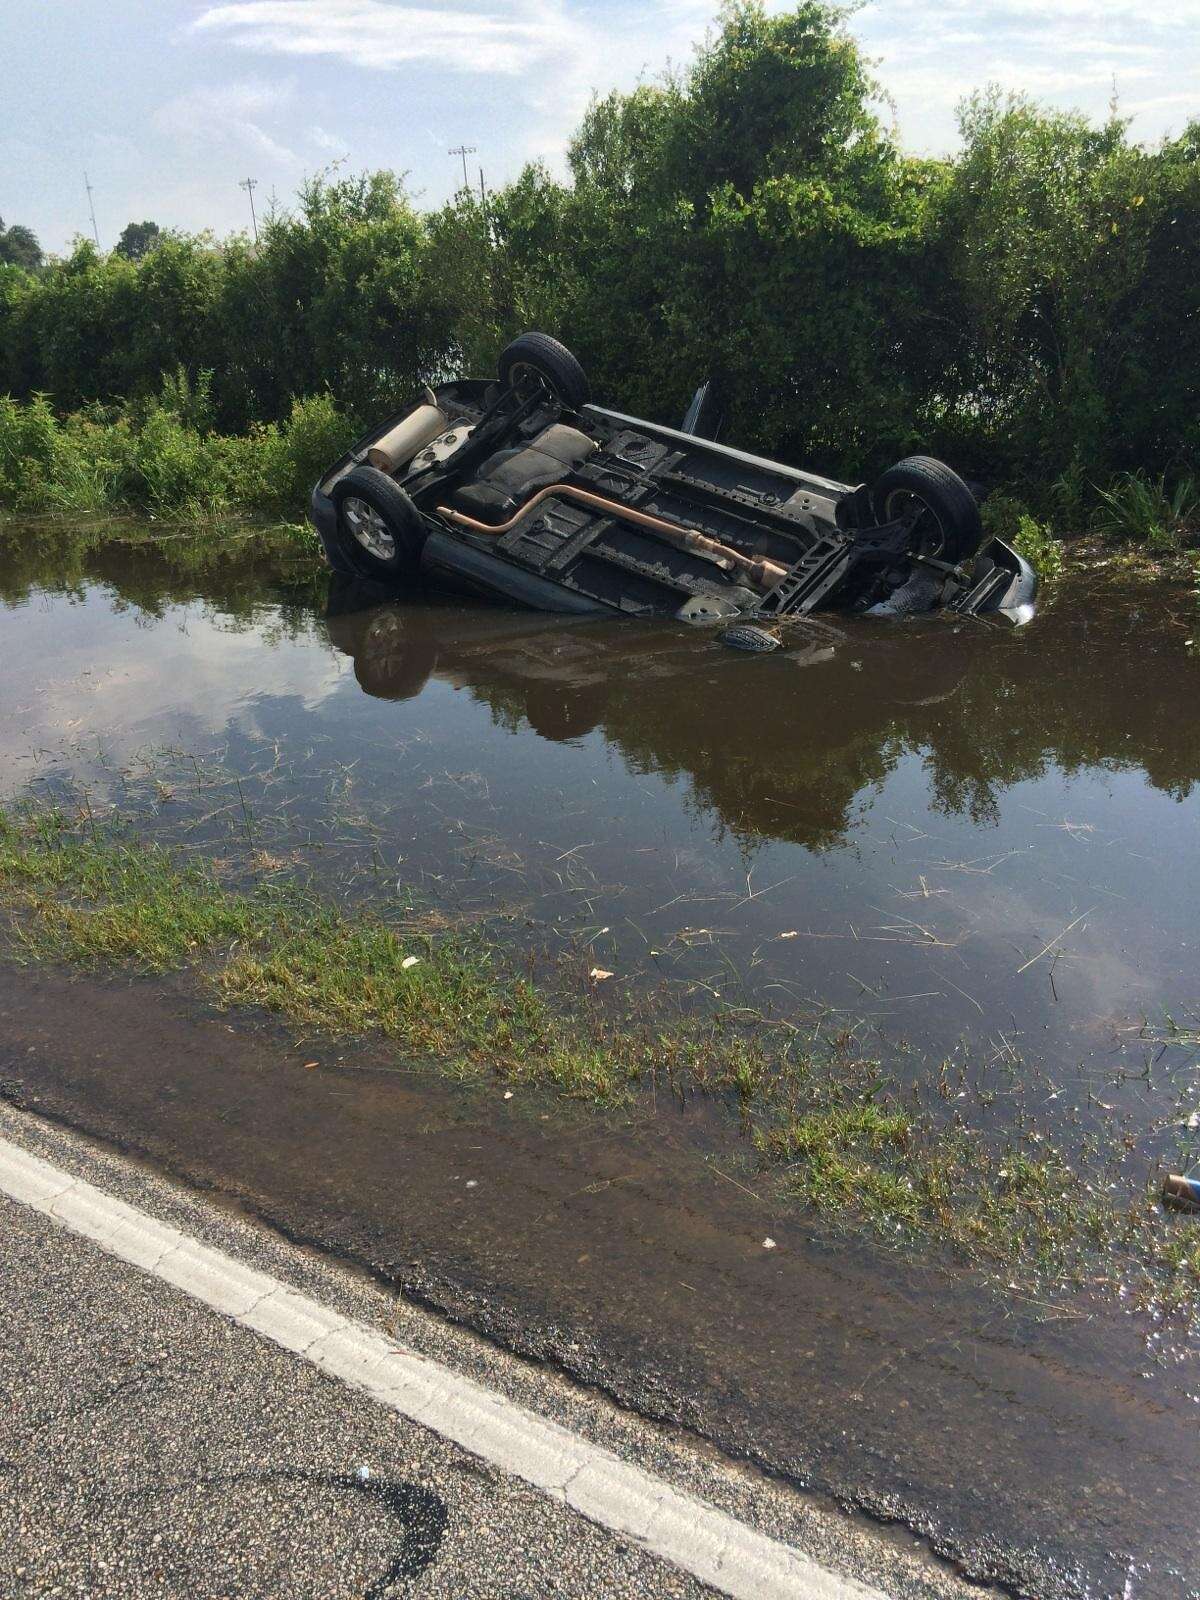 Lt. Shawn Sayers and Deputy Phil Crowell were traveling in the 5500 block of Katy Hockley Cut-Off Road on May 27 when they observed a black car overturned and submerged in the ditch.